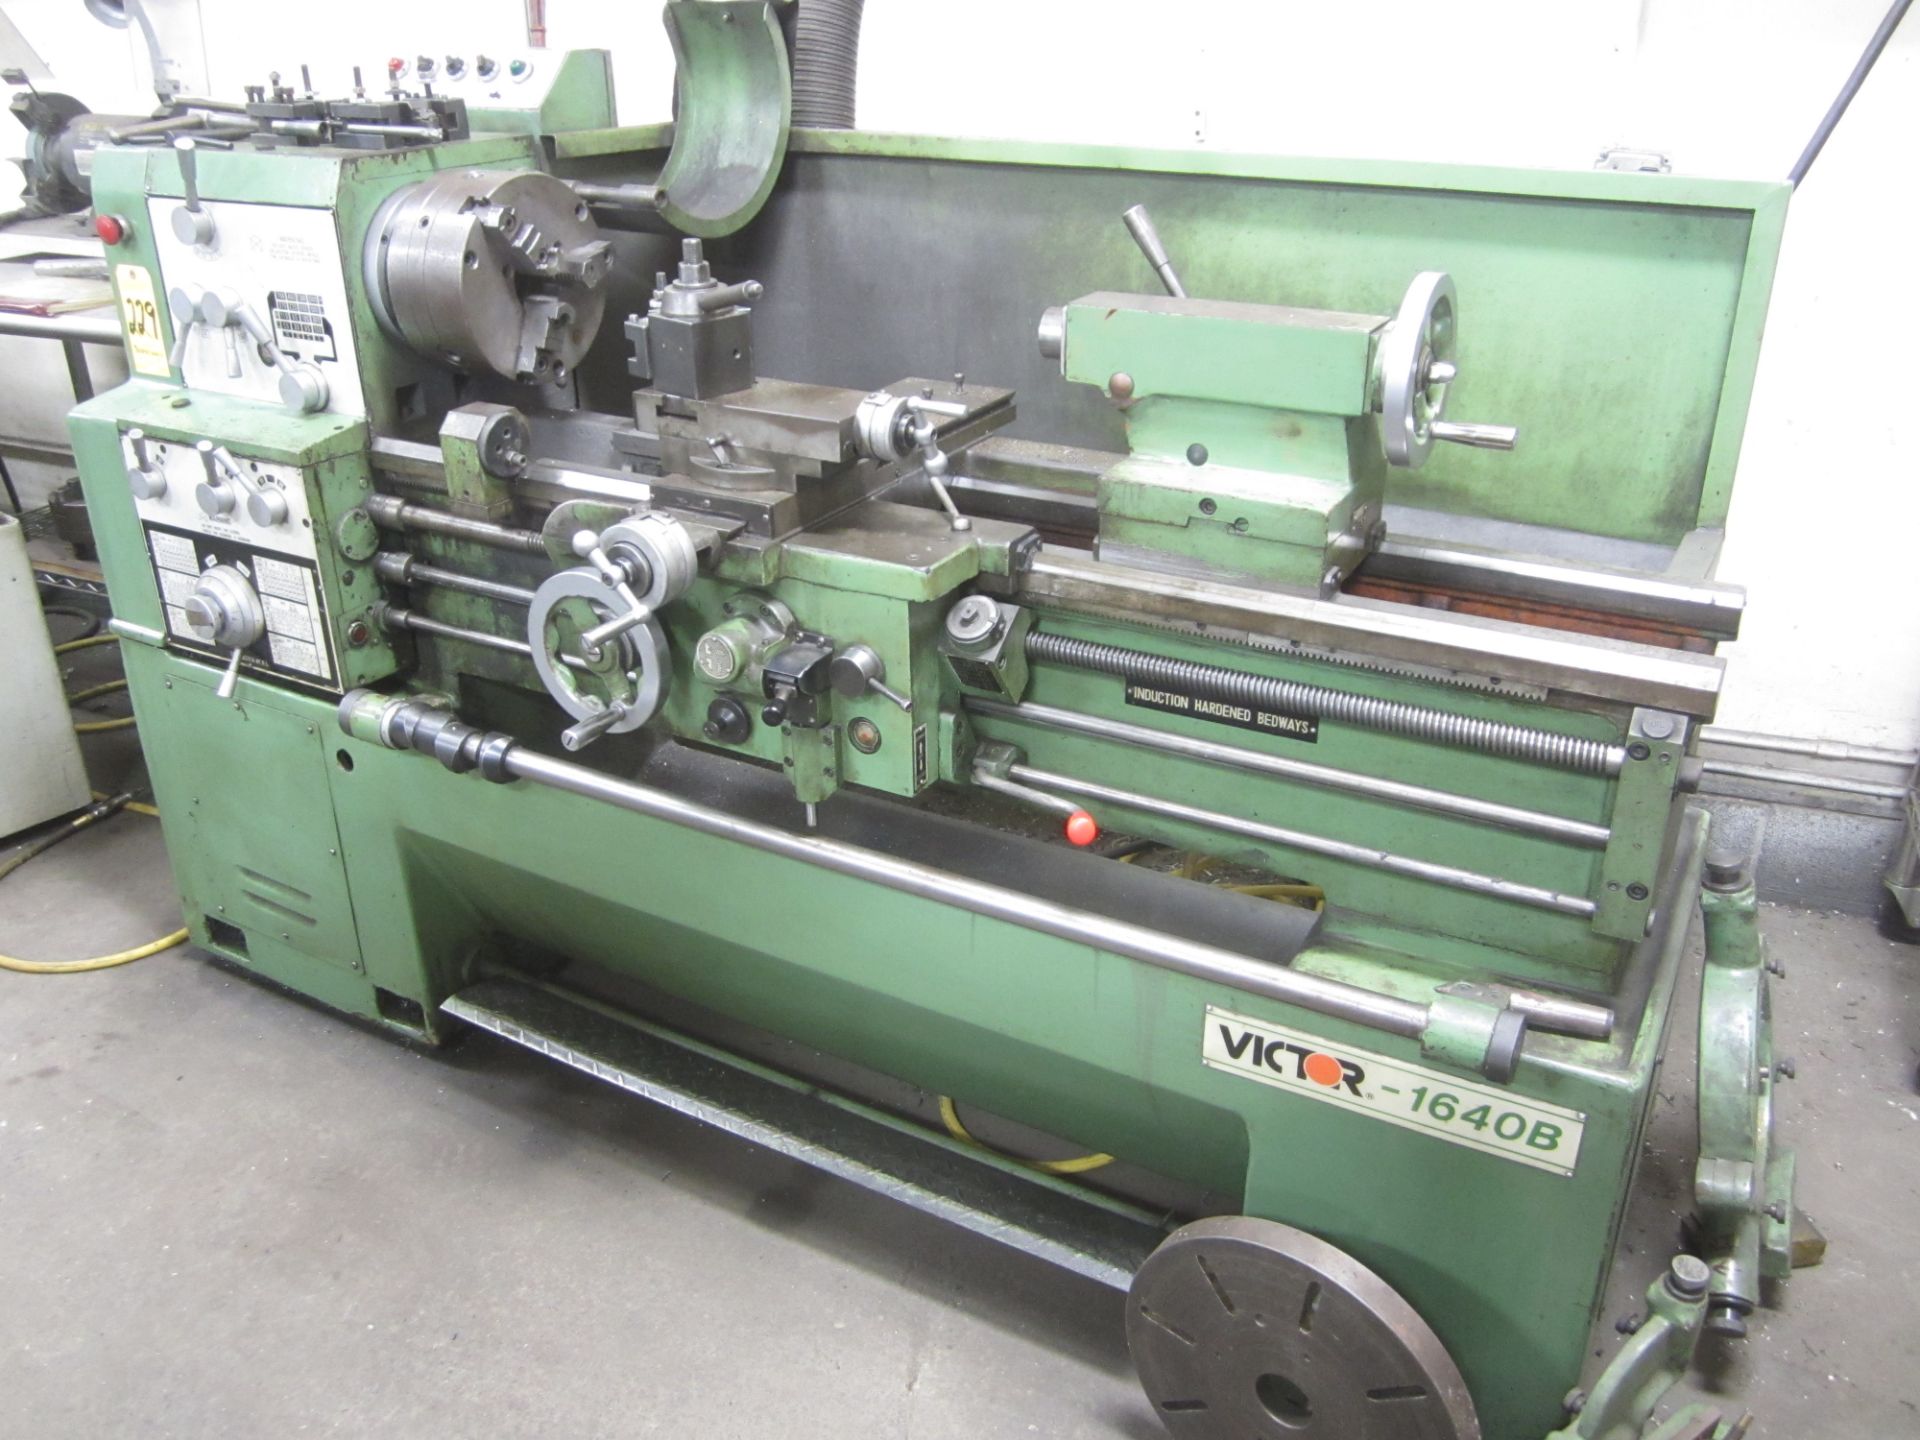 Victor Model 1640B Gear Head Engine Lathe, s/n 9071957, 16 In. X 40 In. Capacity, 5C Lever Type - Image 2 of 4